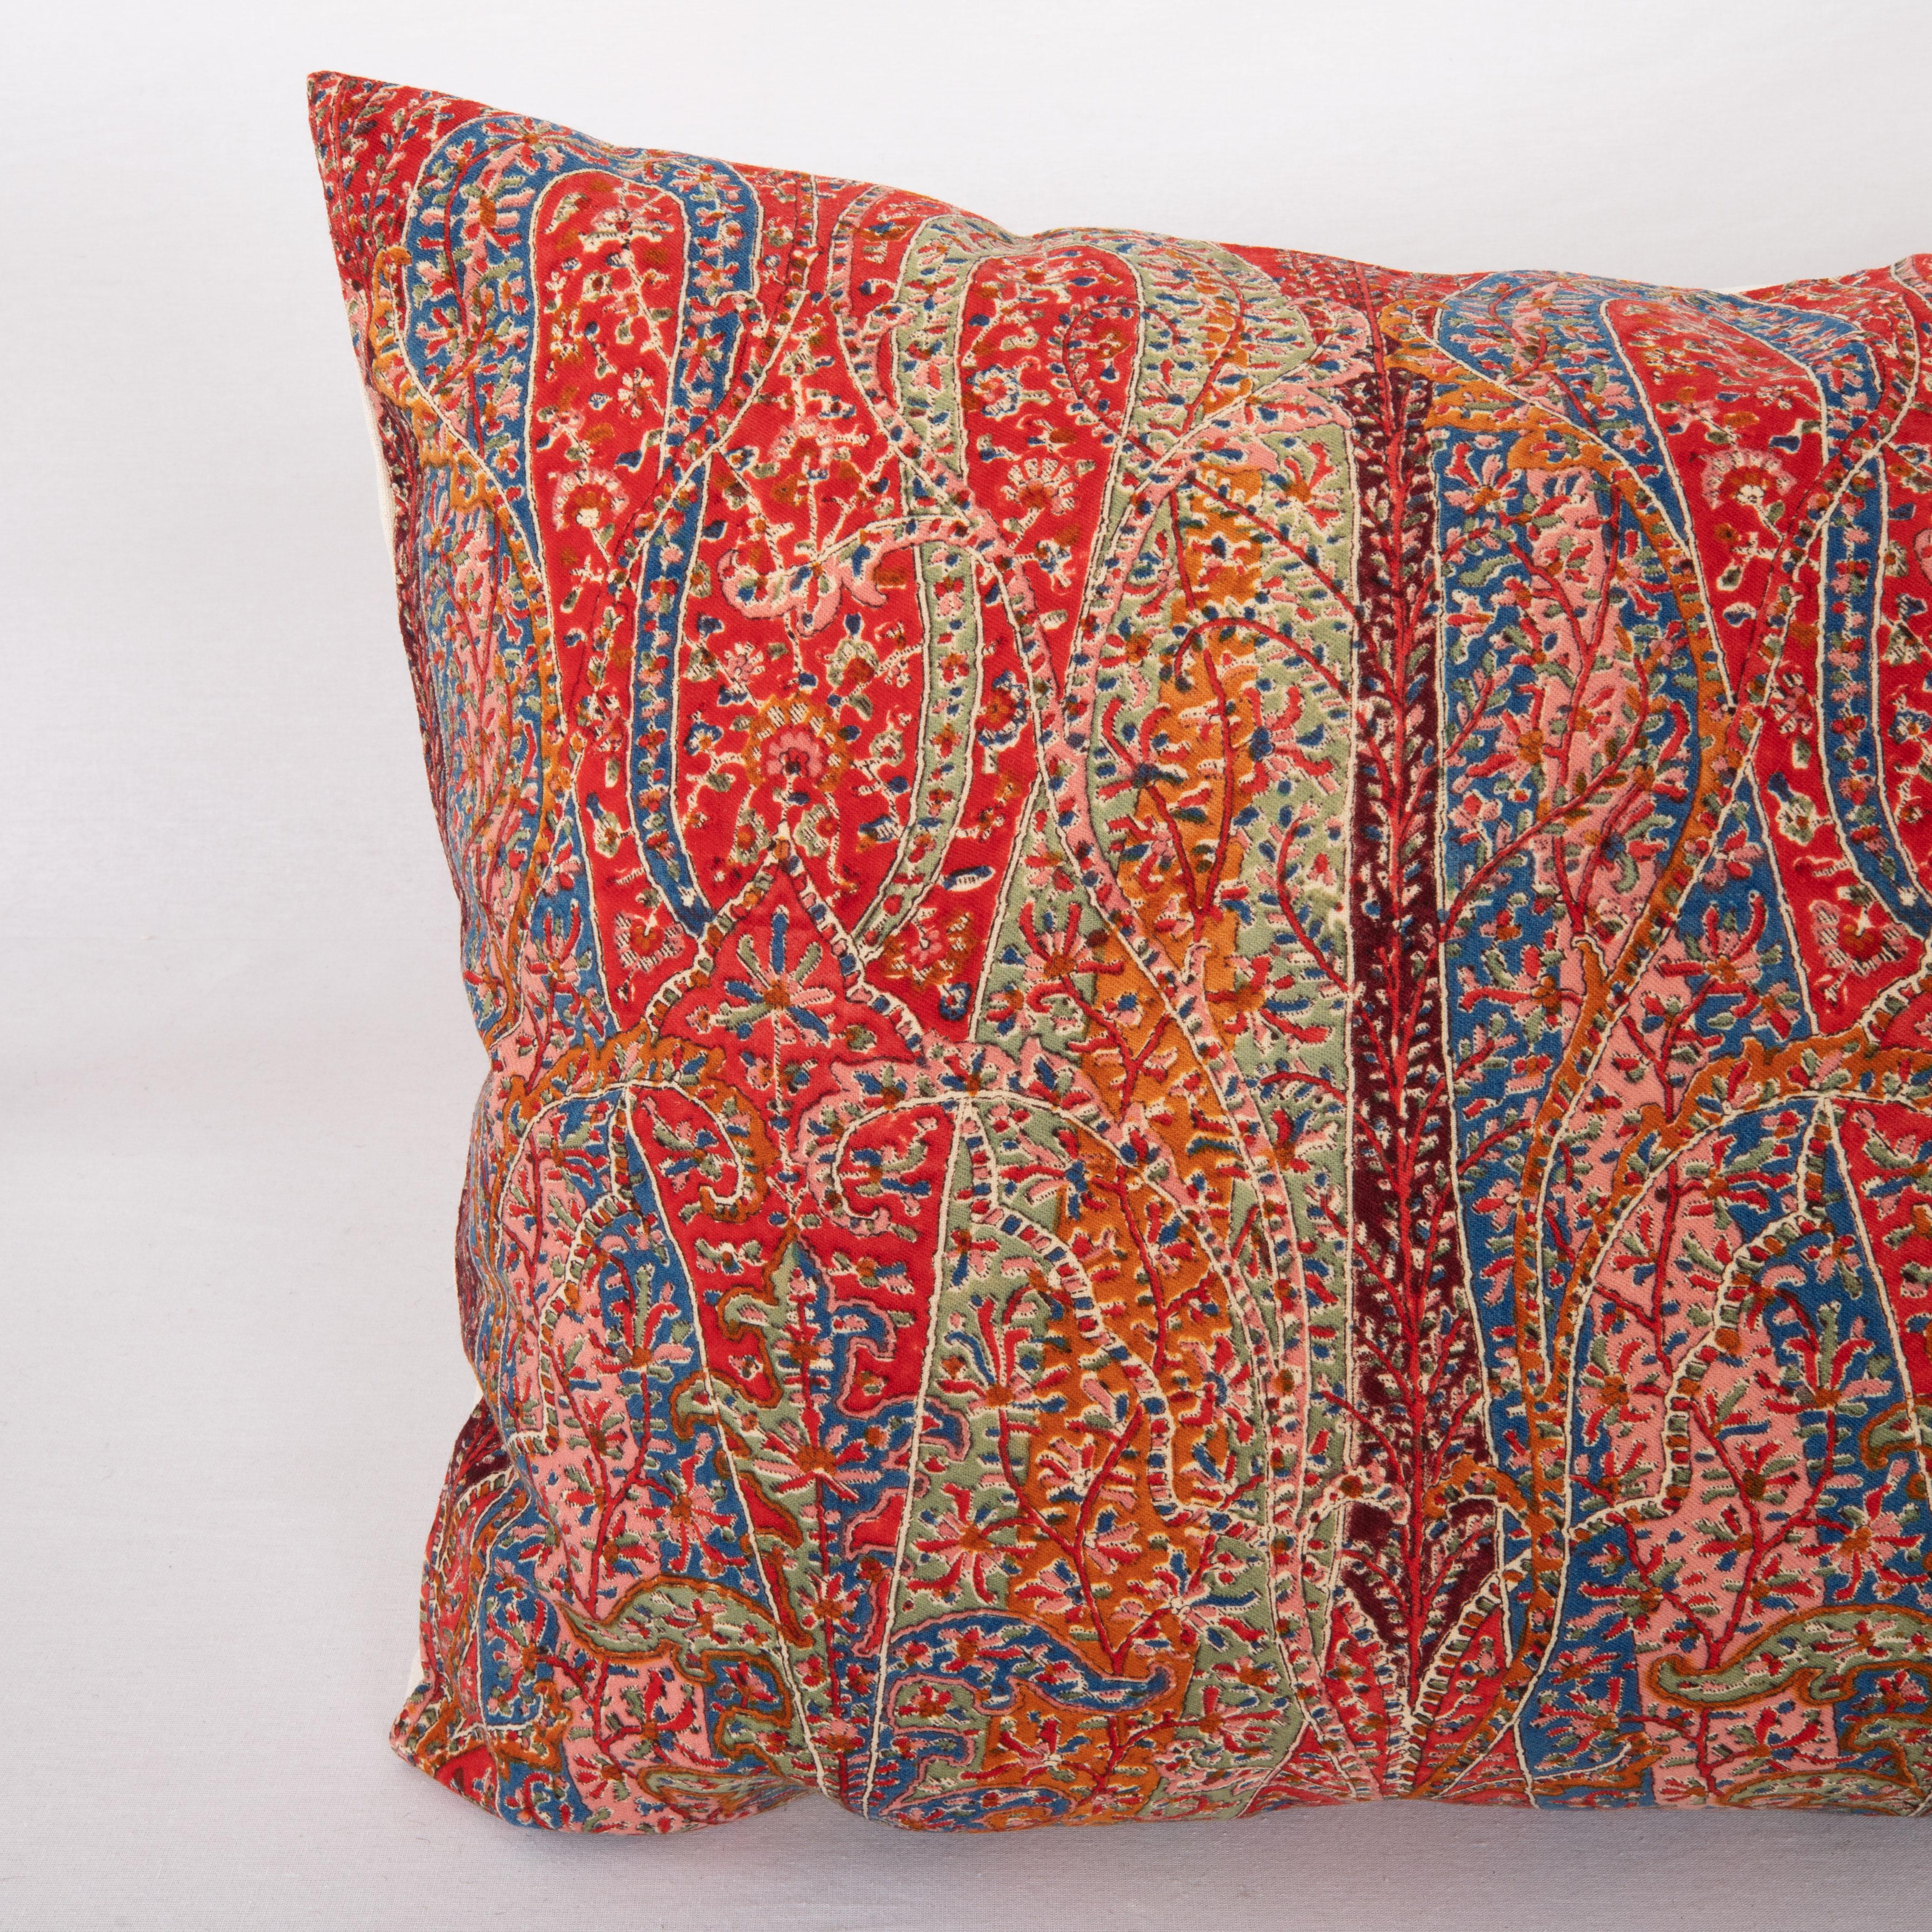 Late Victorian Pillow Cover Made from a an Antique Printed Scottish Paisley Shawl    For Sale